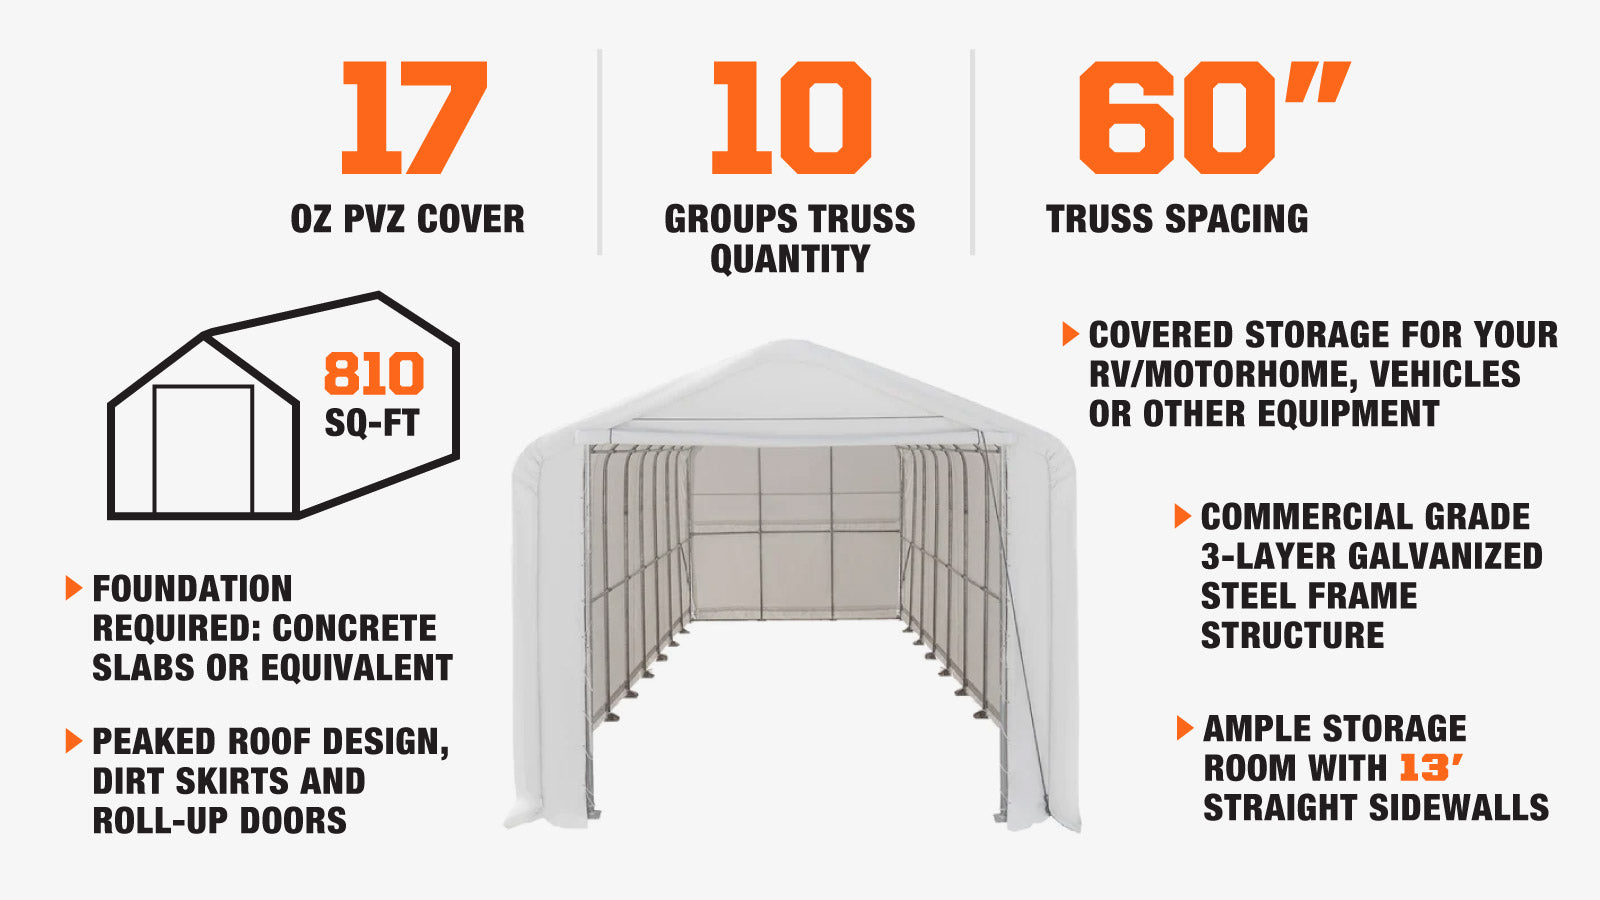 TMG Industrial 18’ x 45’ RV/Motorhome Storage Shelter, 17 oz PVC Fabric Cover, Front Roll-Up Door, Enclosed Rear Wall, 3-Layer Galvanized Steel Frame, 13’ Straight Sidewalls, TMG-ST1845-description-image